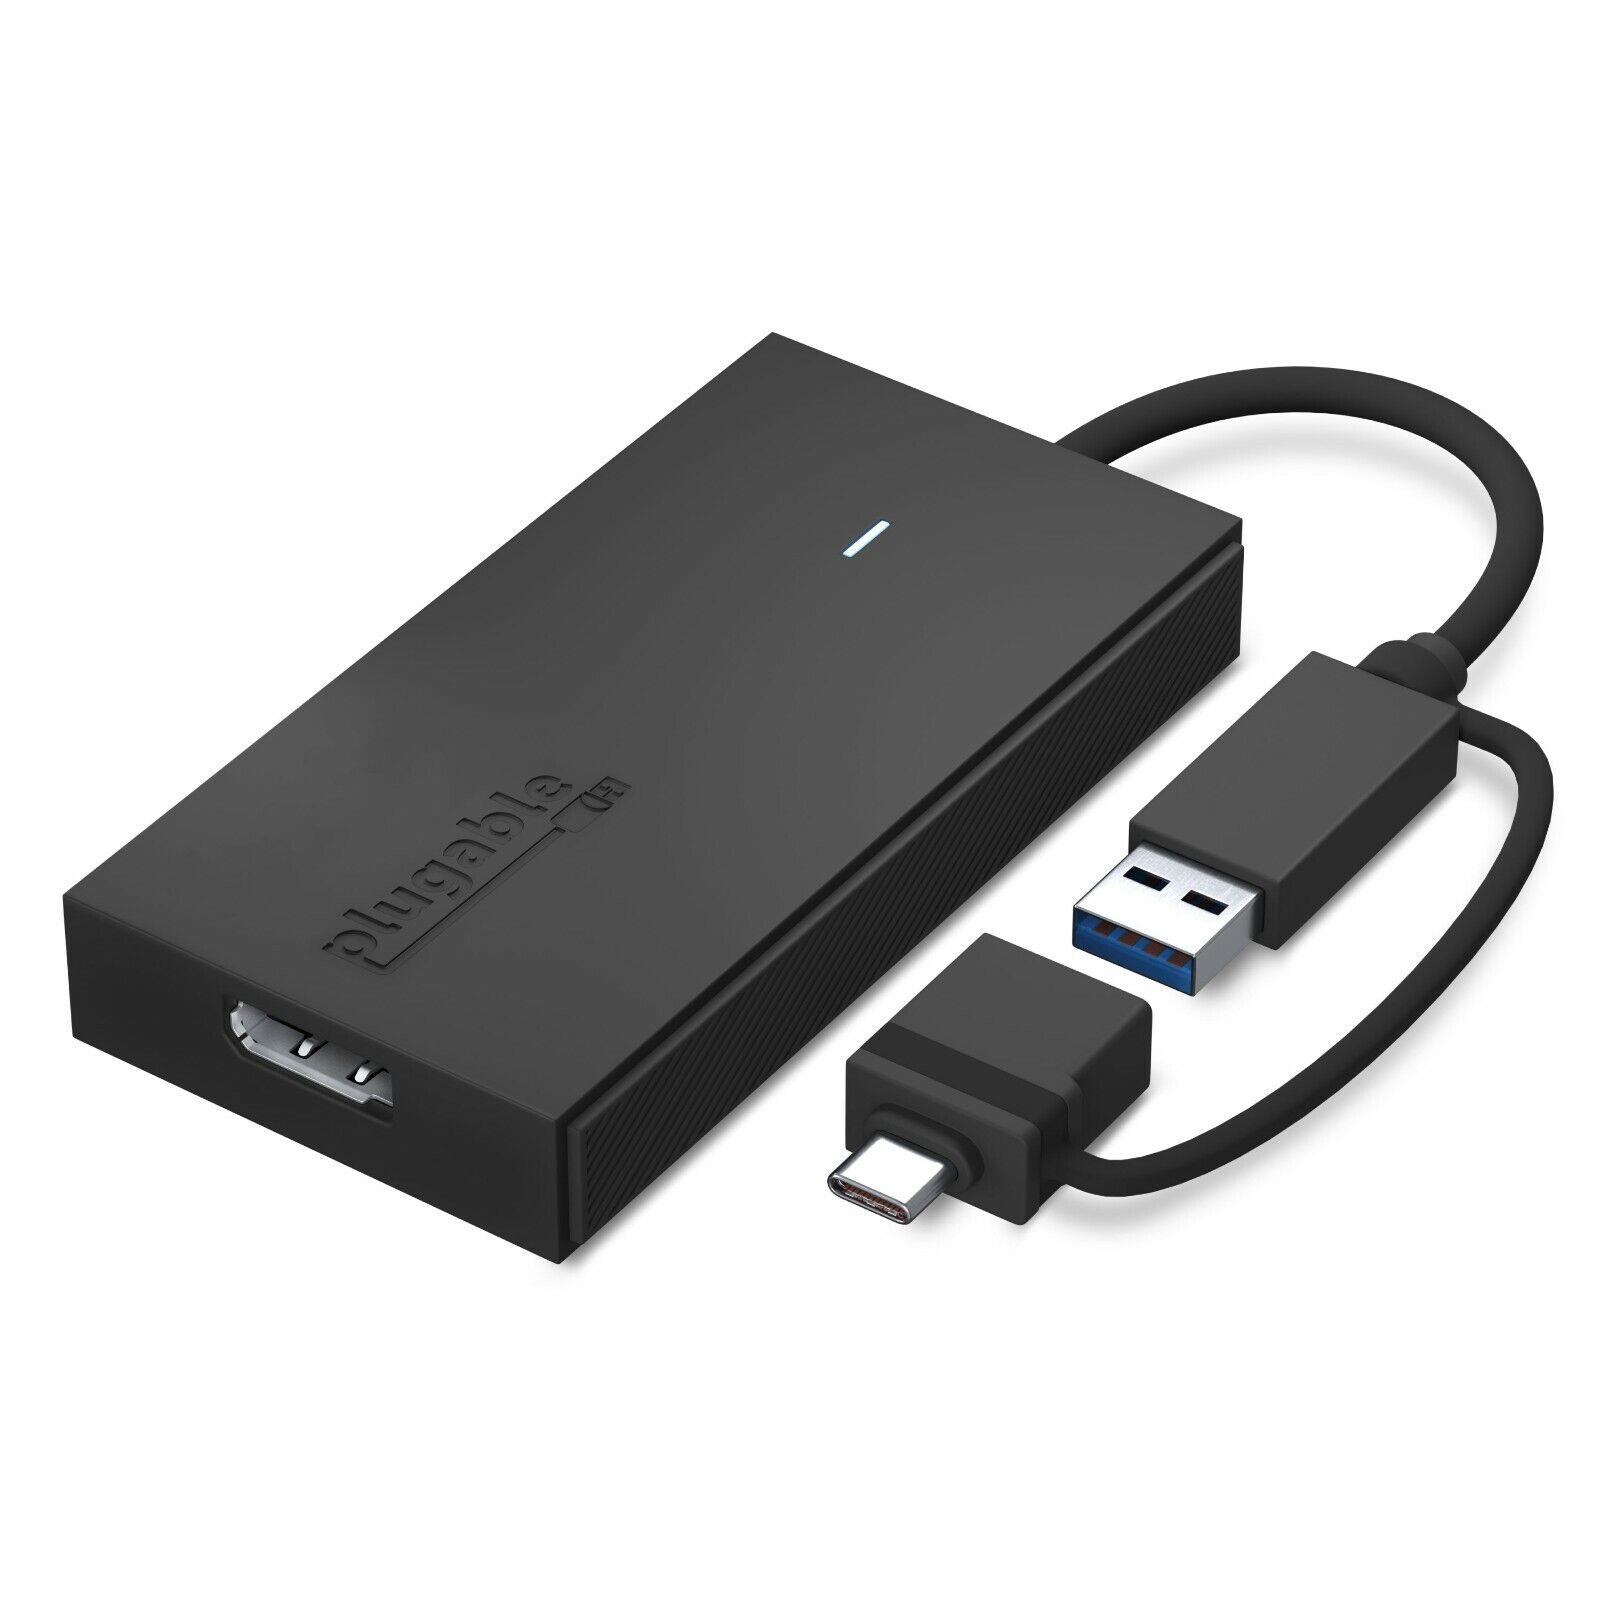 Plugable USB C or USB 3.0 to DisplayPort Adapter for Mac and Windows